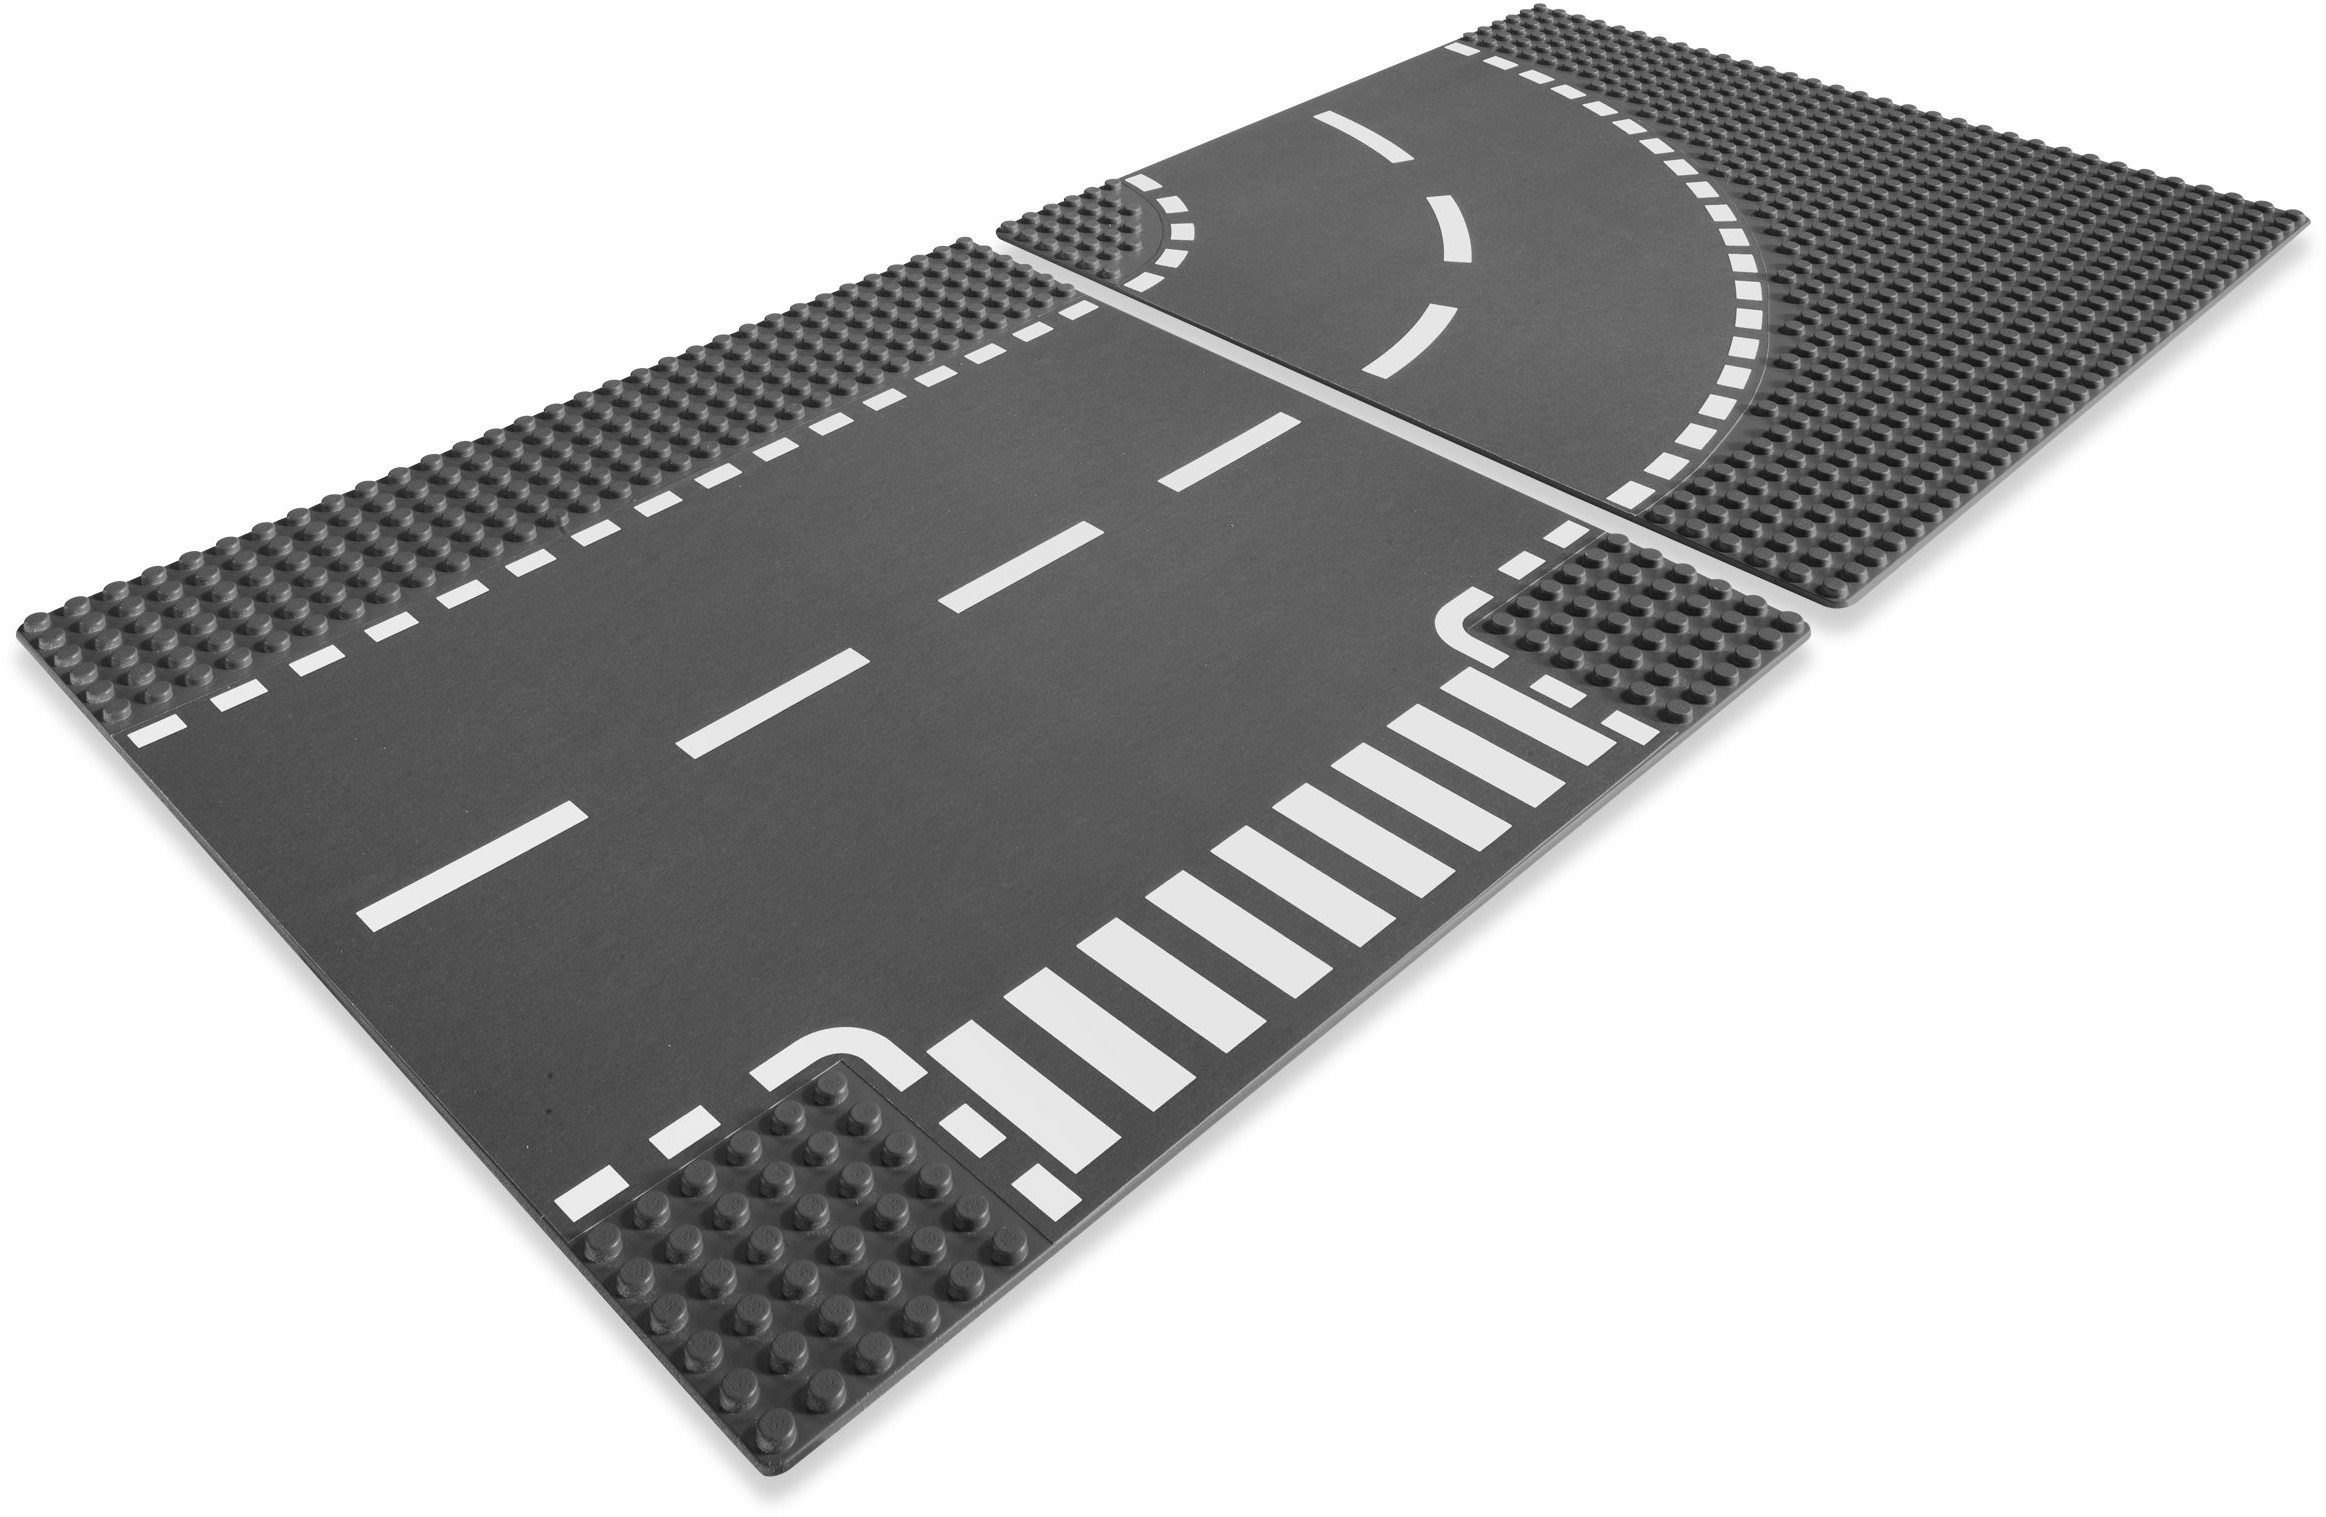 7281 LEGO® T-Junction & Curved Road Plates